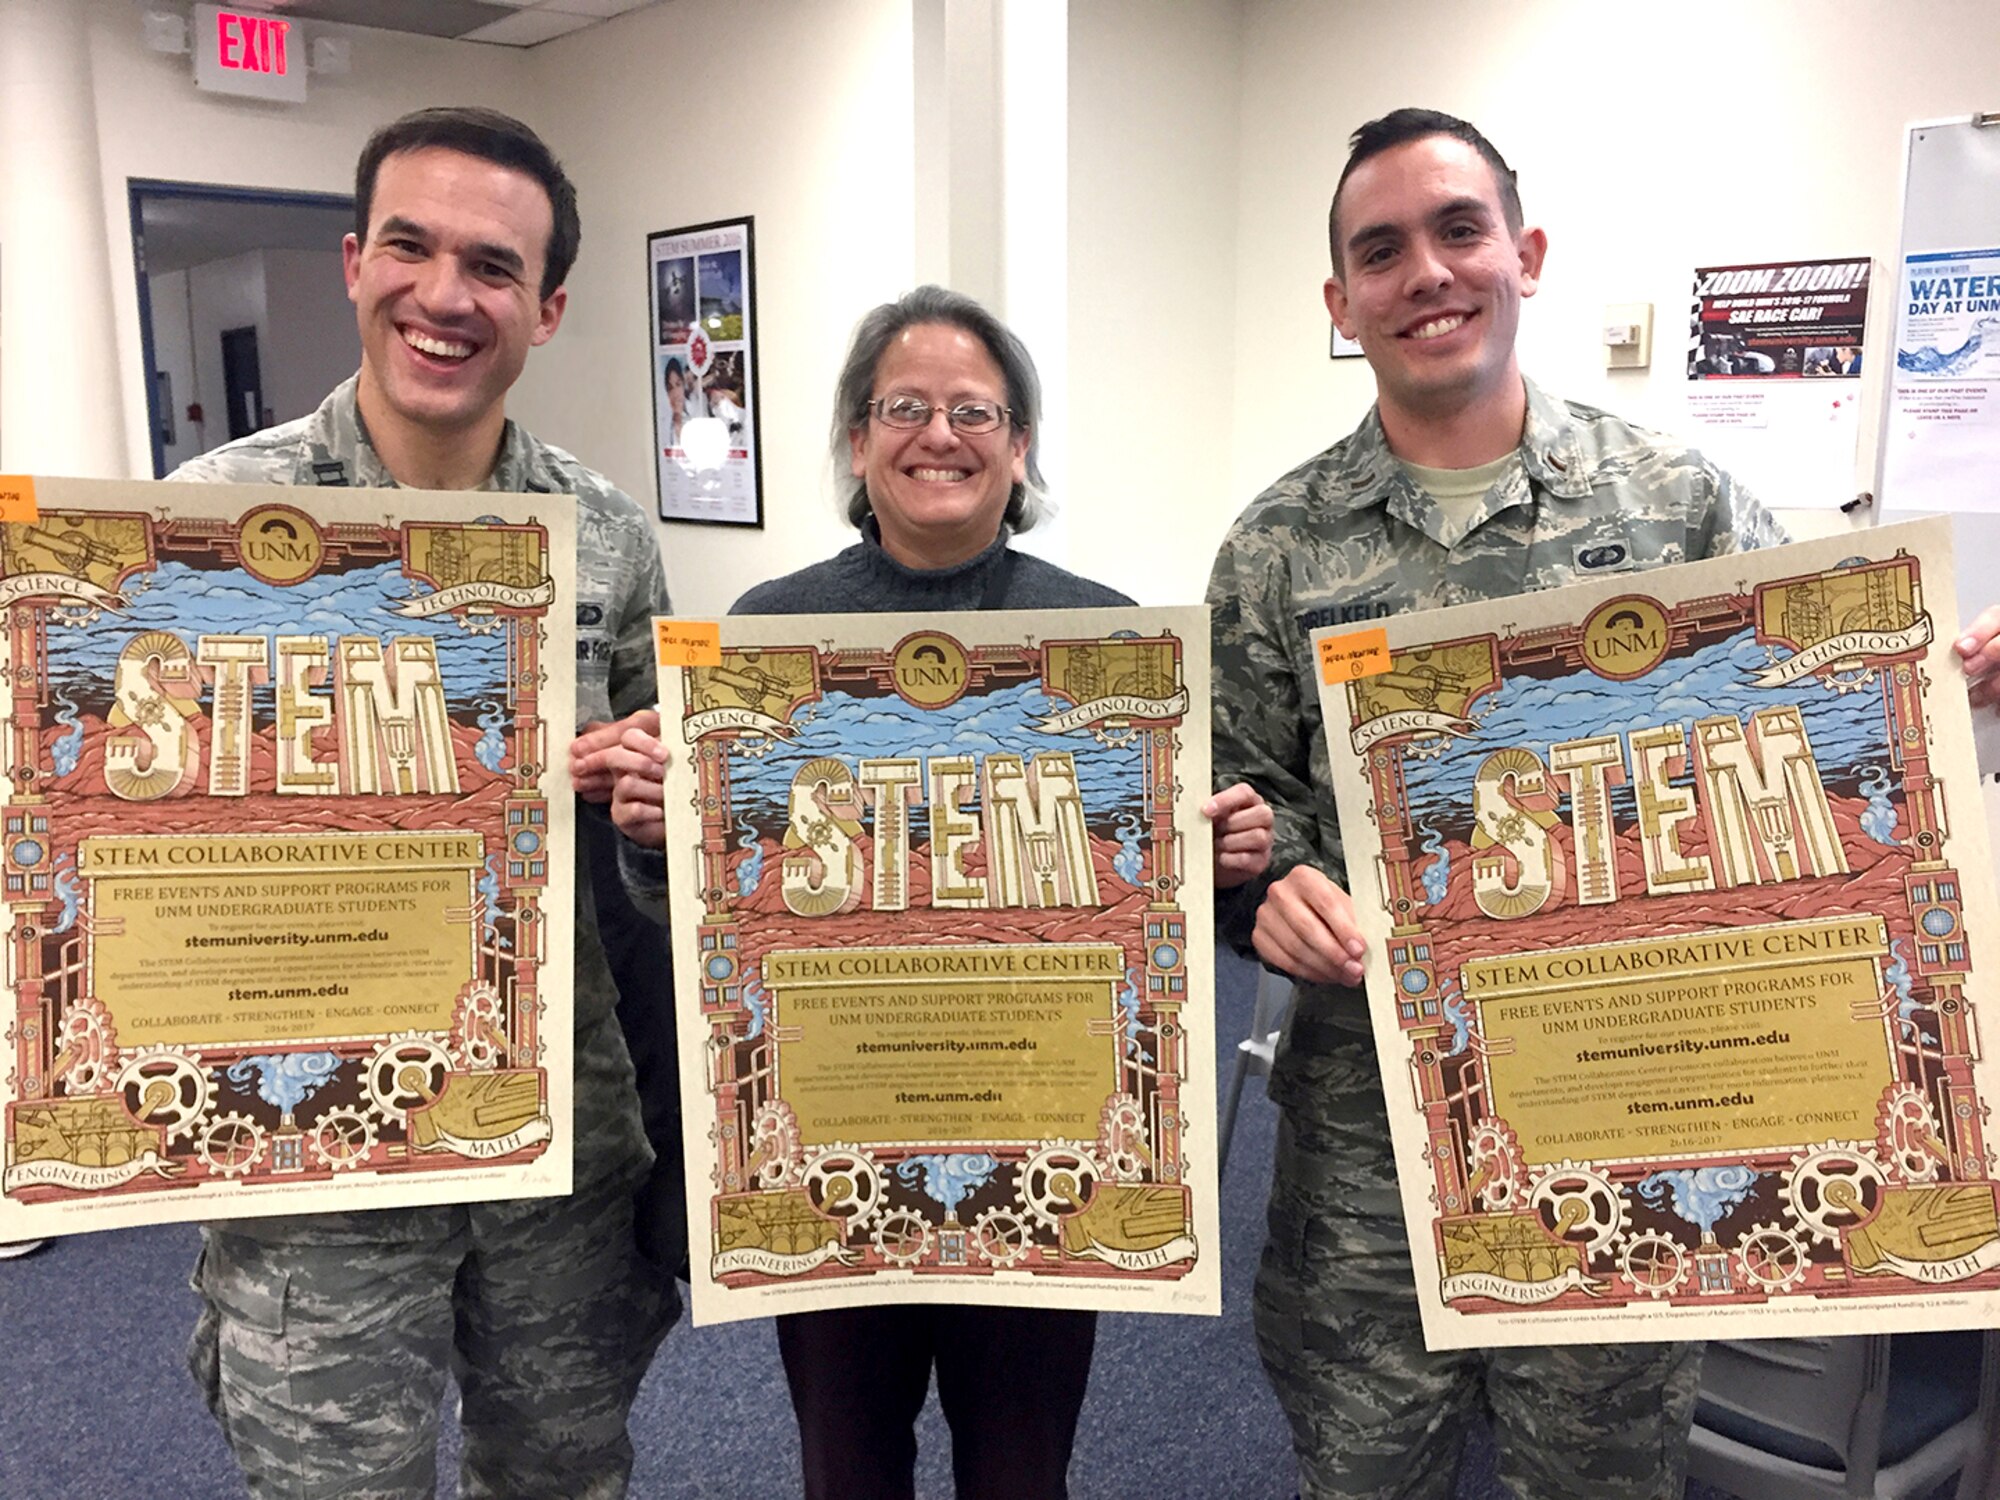 Air Force Research Laboratory mentors, from left, Capt. Timothy Wolfe, Imelda Atencio and 2nd Lt. Evan Threlkeld hold posters announcing the University of New Mexico STEM Collaborative Center during a visit to that center. The mentoring program matches UNM undergraduate students with AFRL scientists and engineers, military or civilian, to provide personal and professional mentorship.